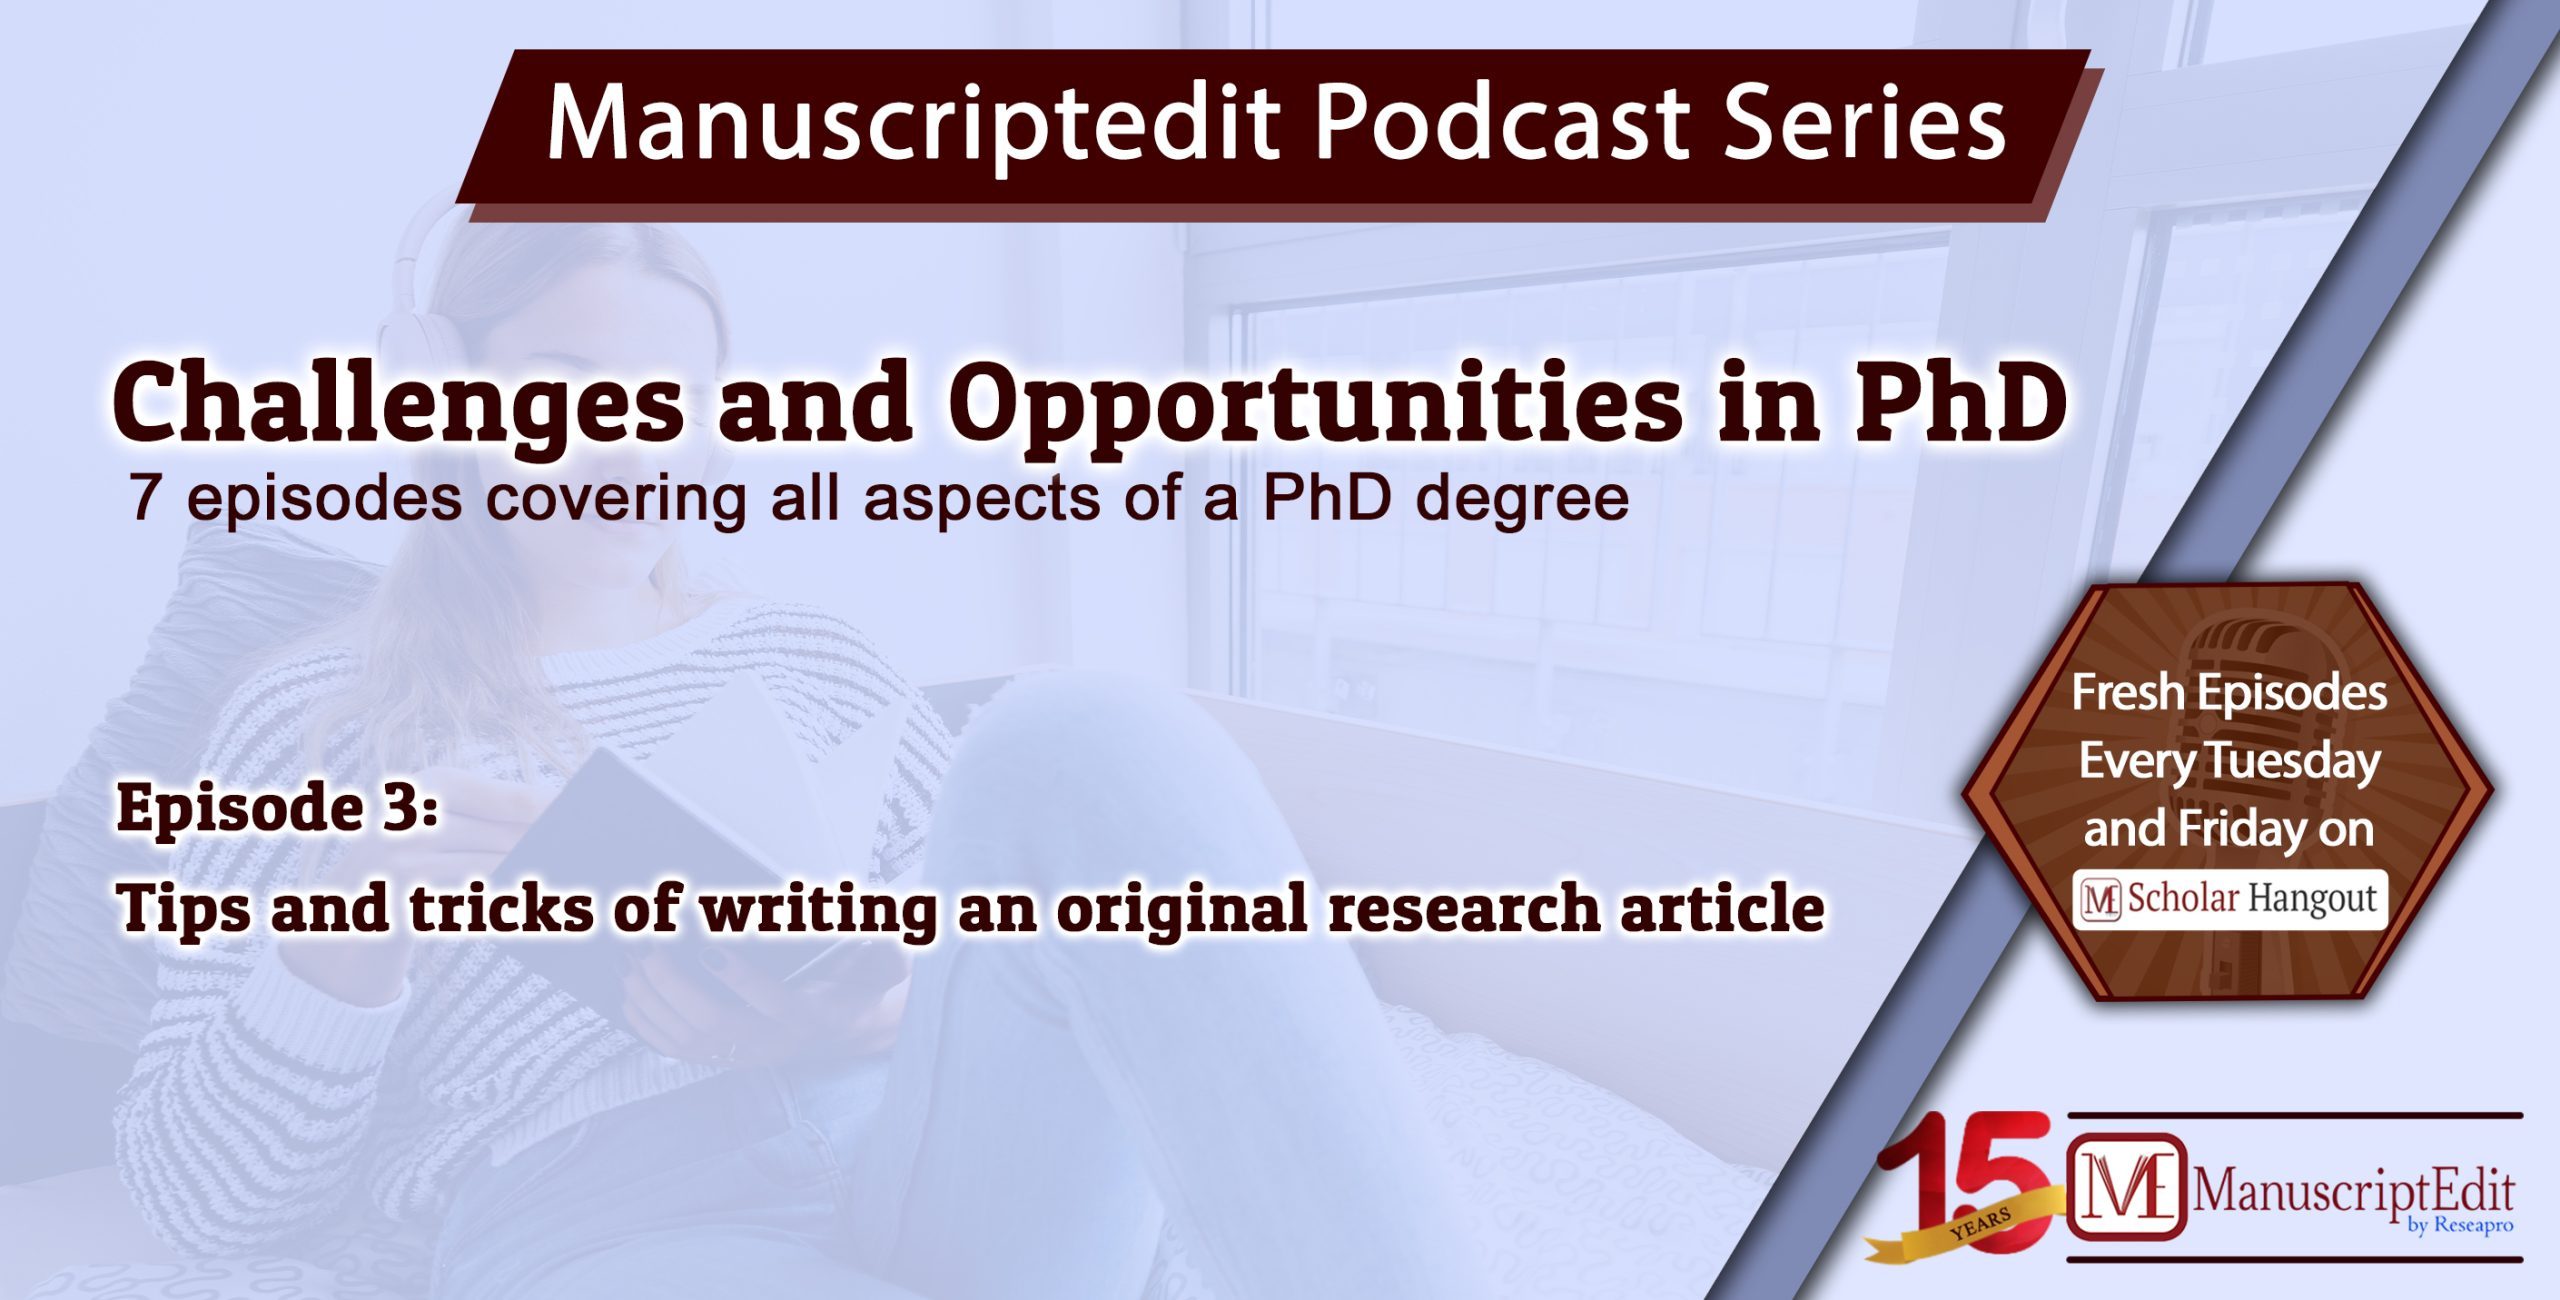 Episode 3: Tips and tricks of writing an original research article